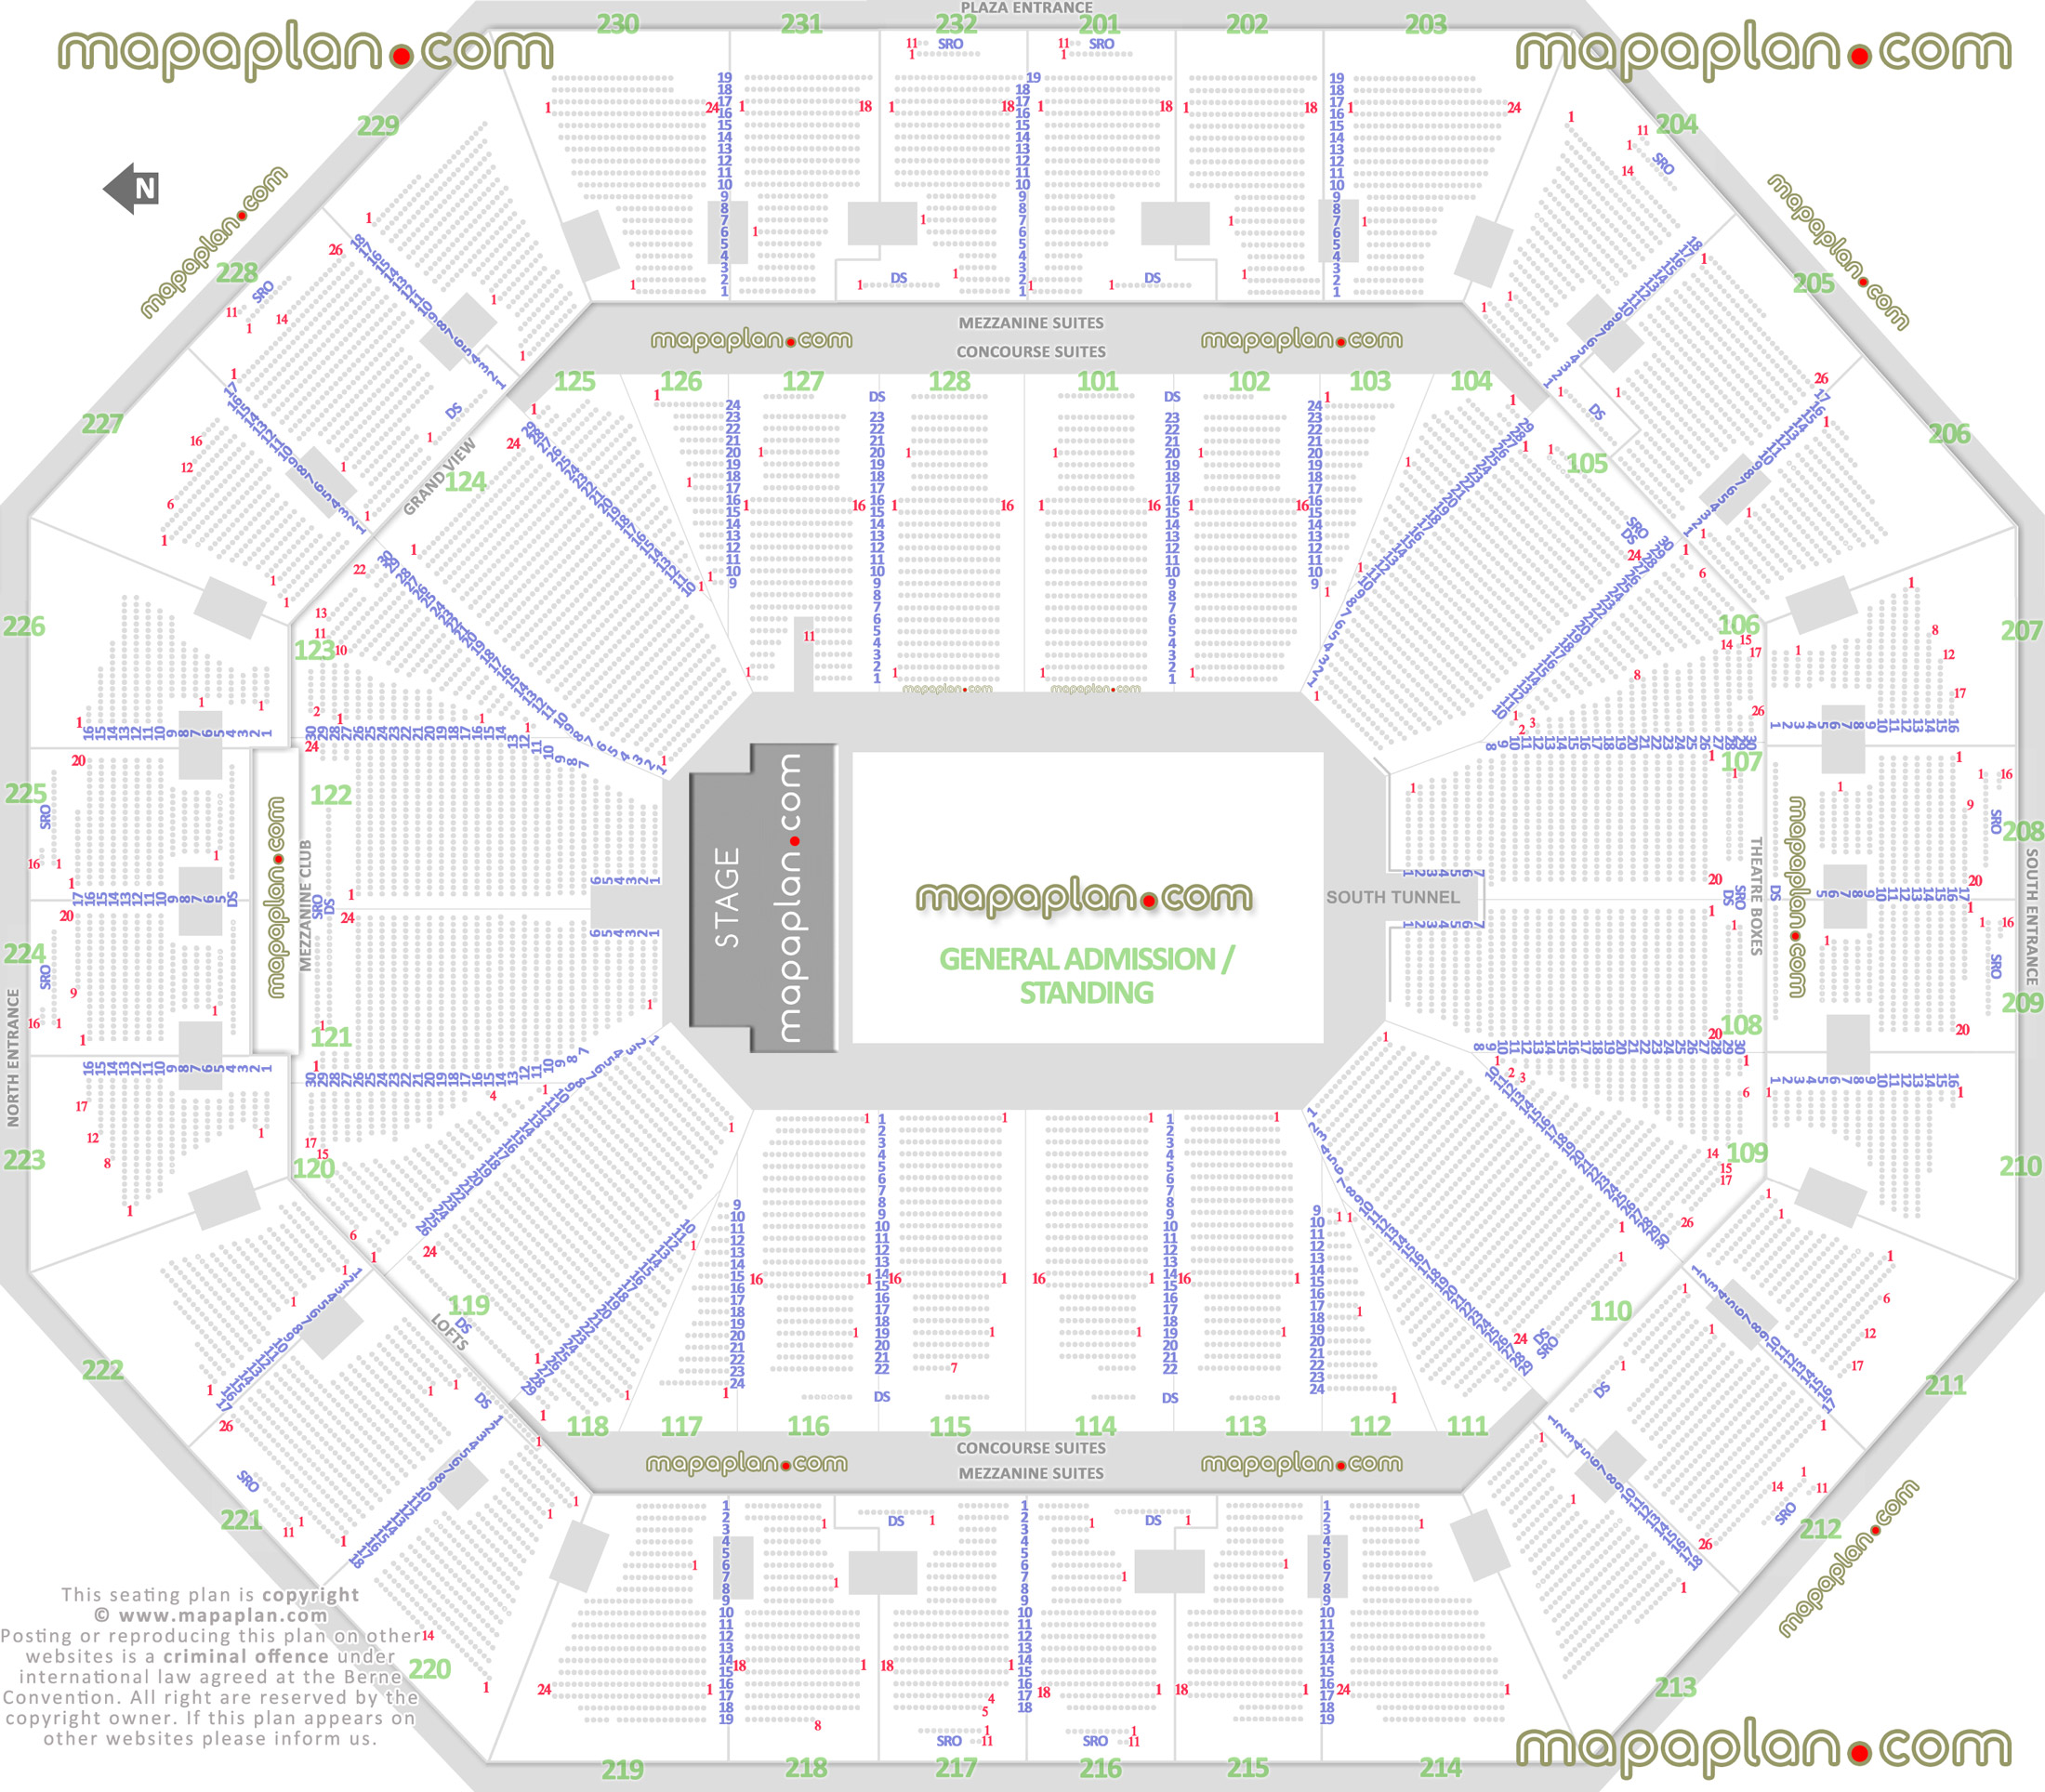 general admission ga floor standing concert capacity plan oakland coliseum arena new printable diagram full exact row letters numbers floor pit plan how many seats row 1 2 3 4 5 6 7 8 9 10 11 12 13 14 15 16 17 18 19 20 21 22 23 24 25 26 27 28 29 30 Oakland Oracle Arena seating chart